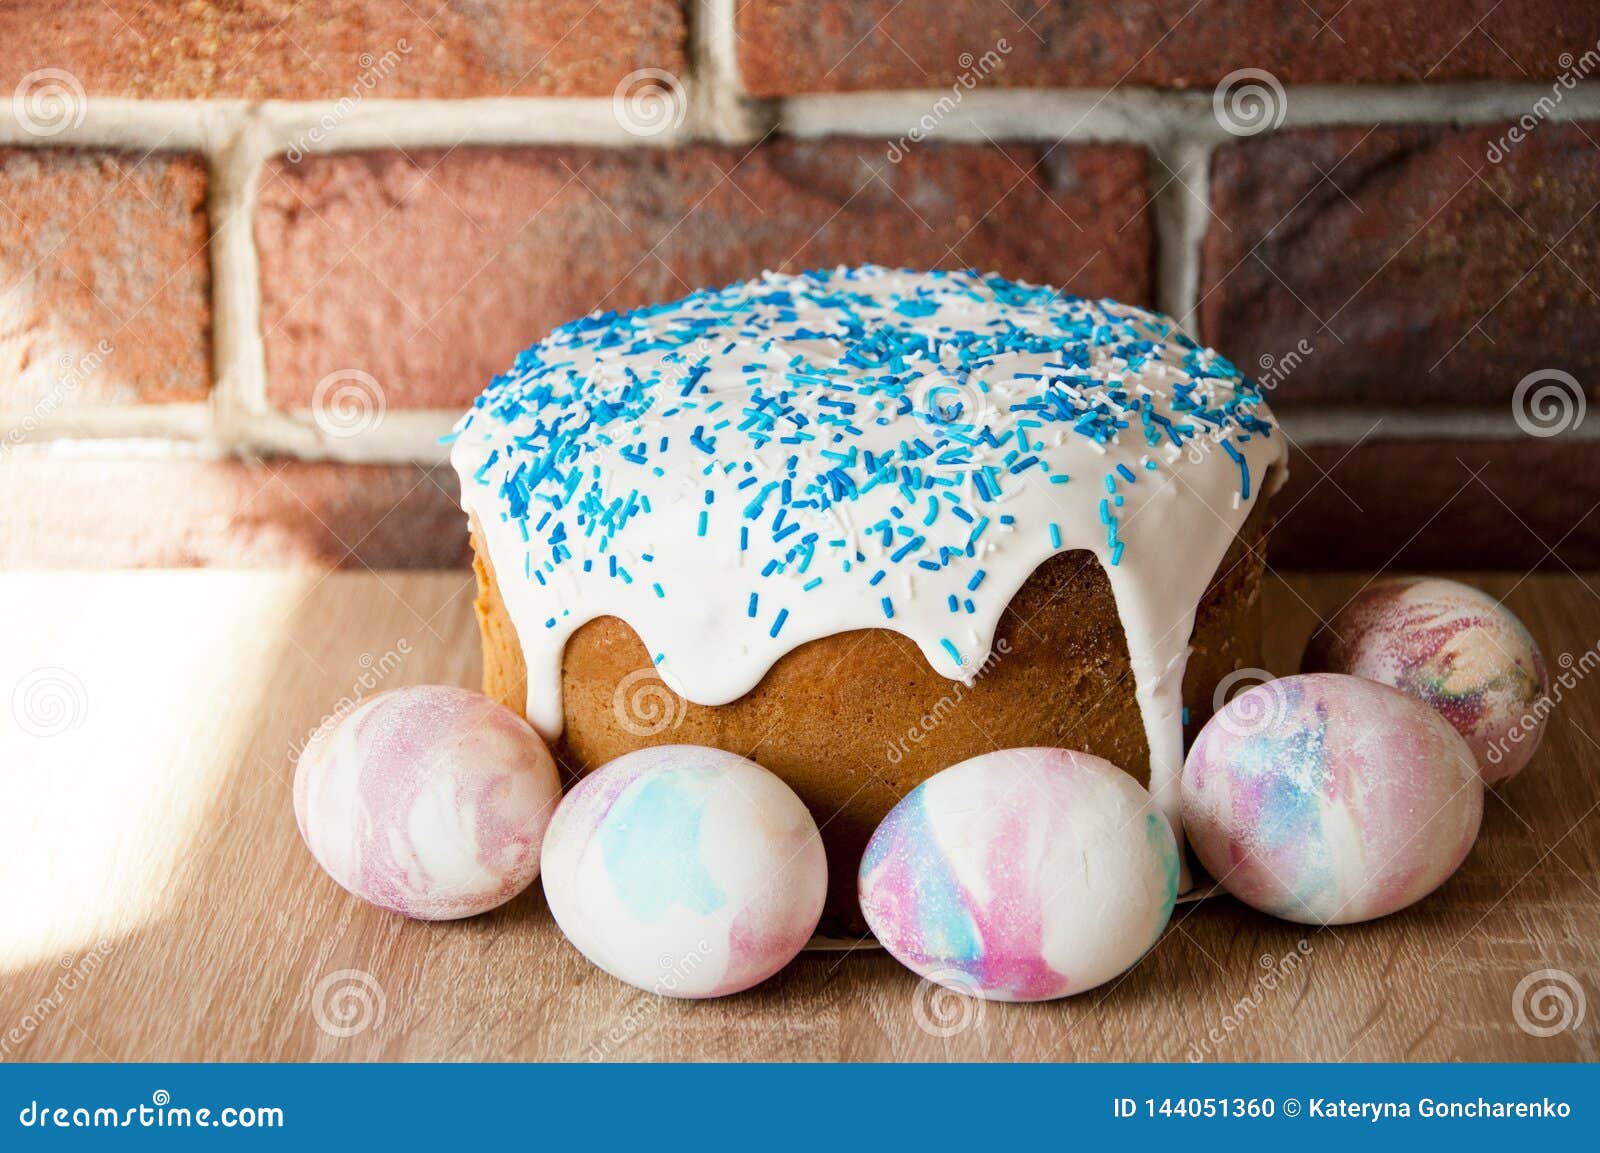 happy easter. dessert. backery. painted eggs. easter cake on table. spring preparation. marble shell. easter cake with sprinkles